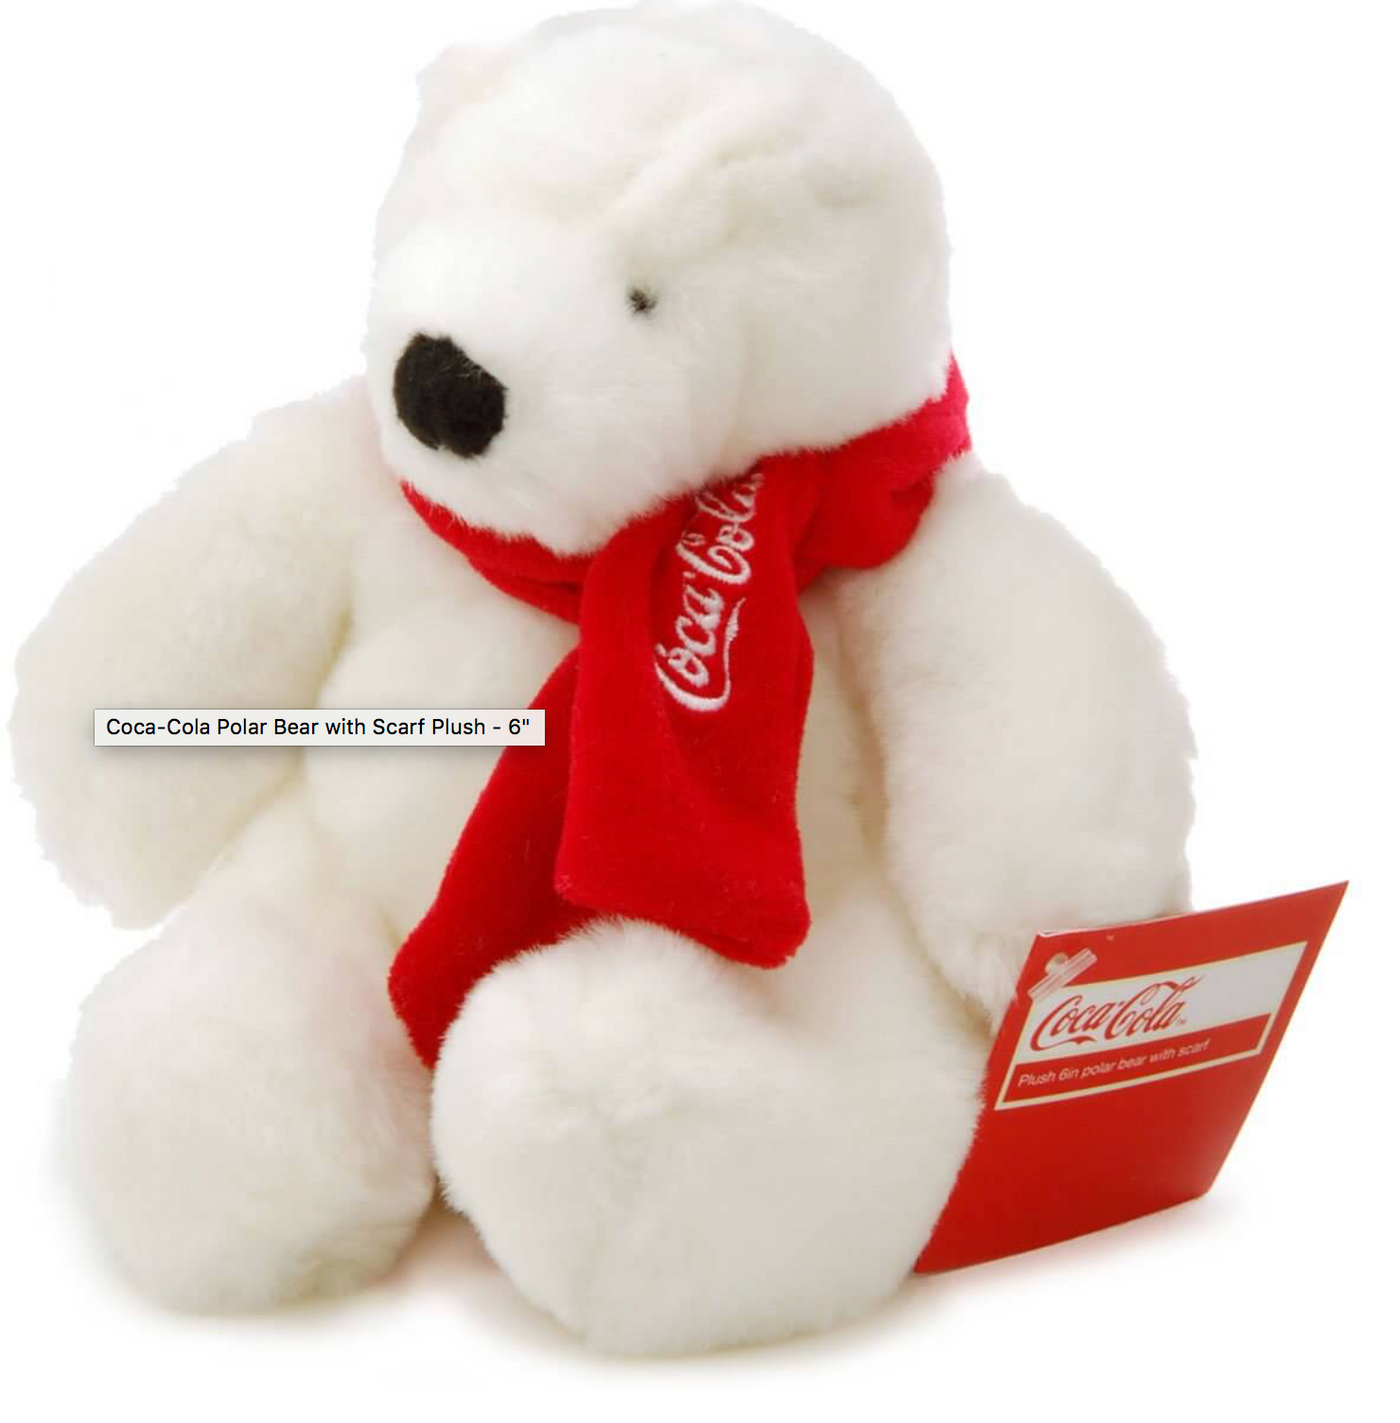 Authentic Coca-Cola Coke Polar Bear with Scarf Plush 6 inc New with Tag